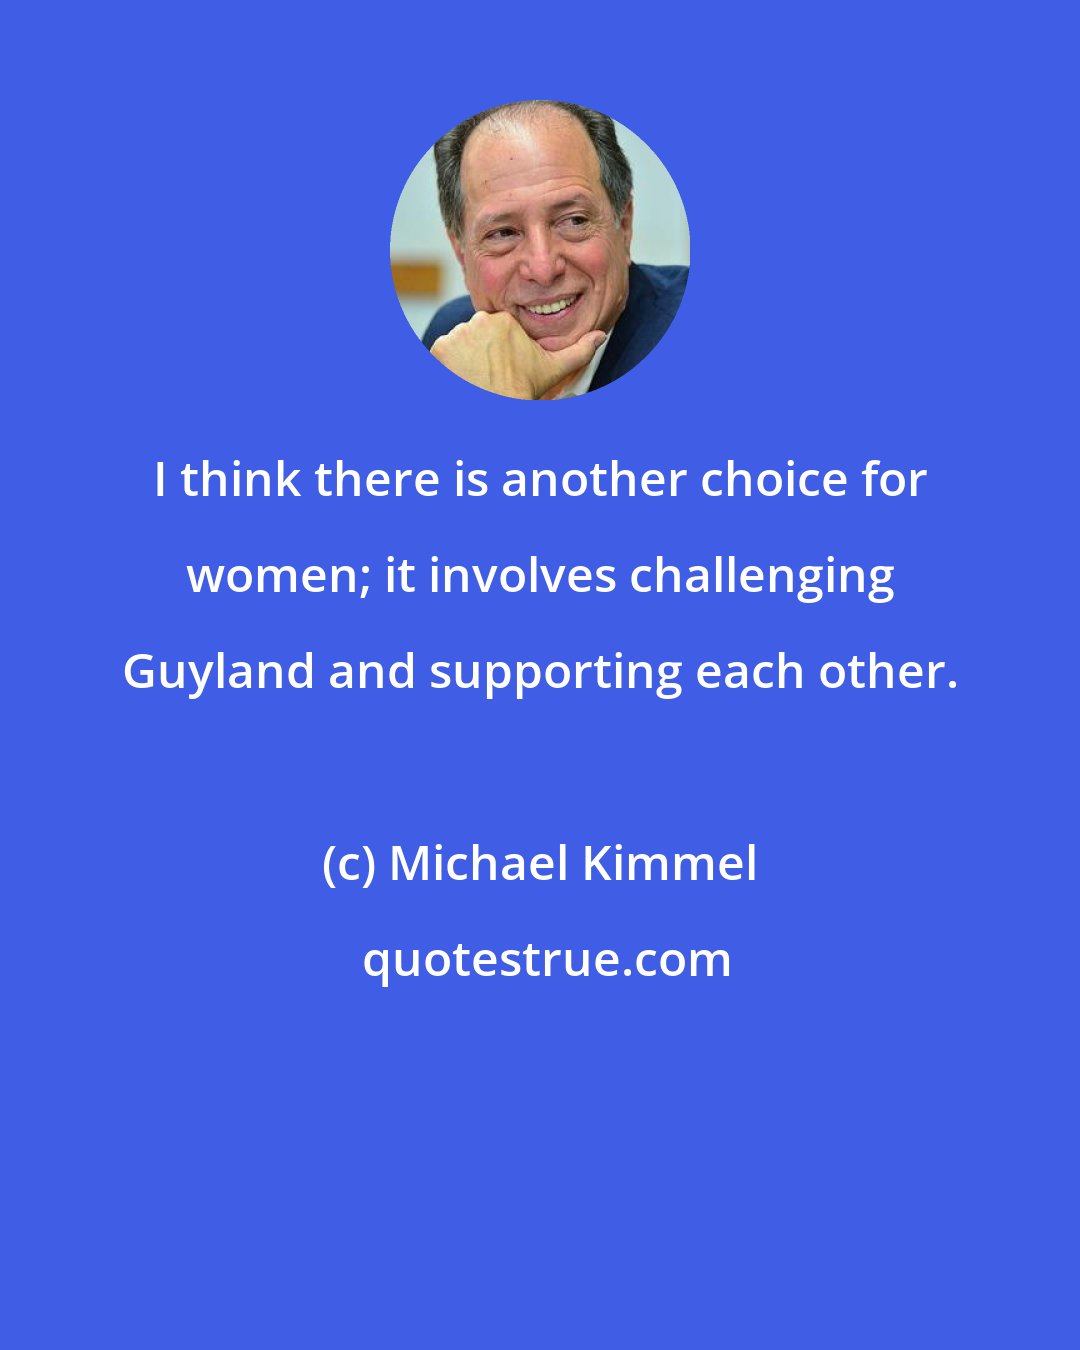 Michael Kimmel: I think there is another choice for women; it involves challenging Guyland and supporting each other.